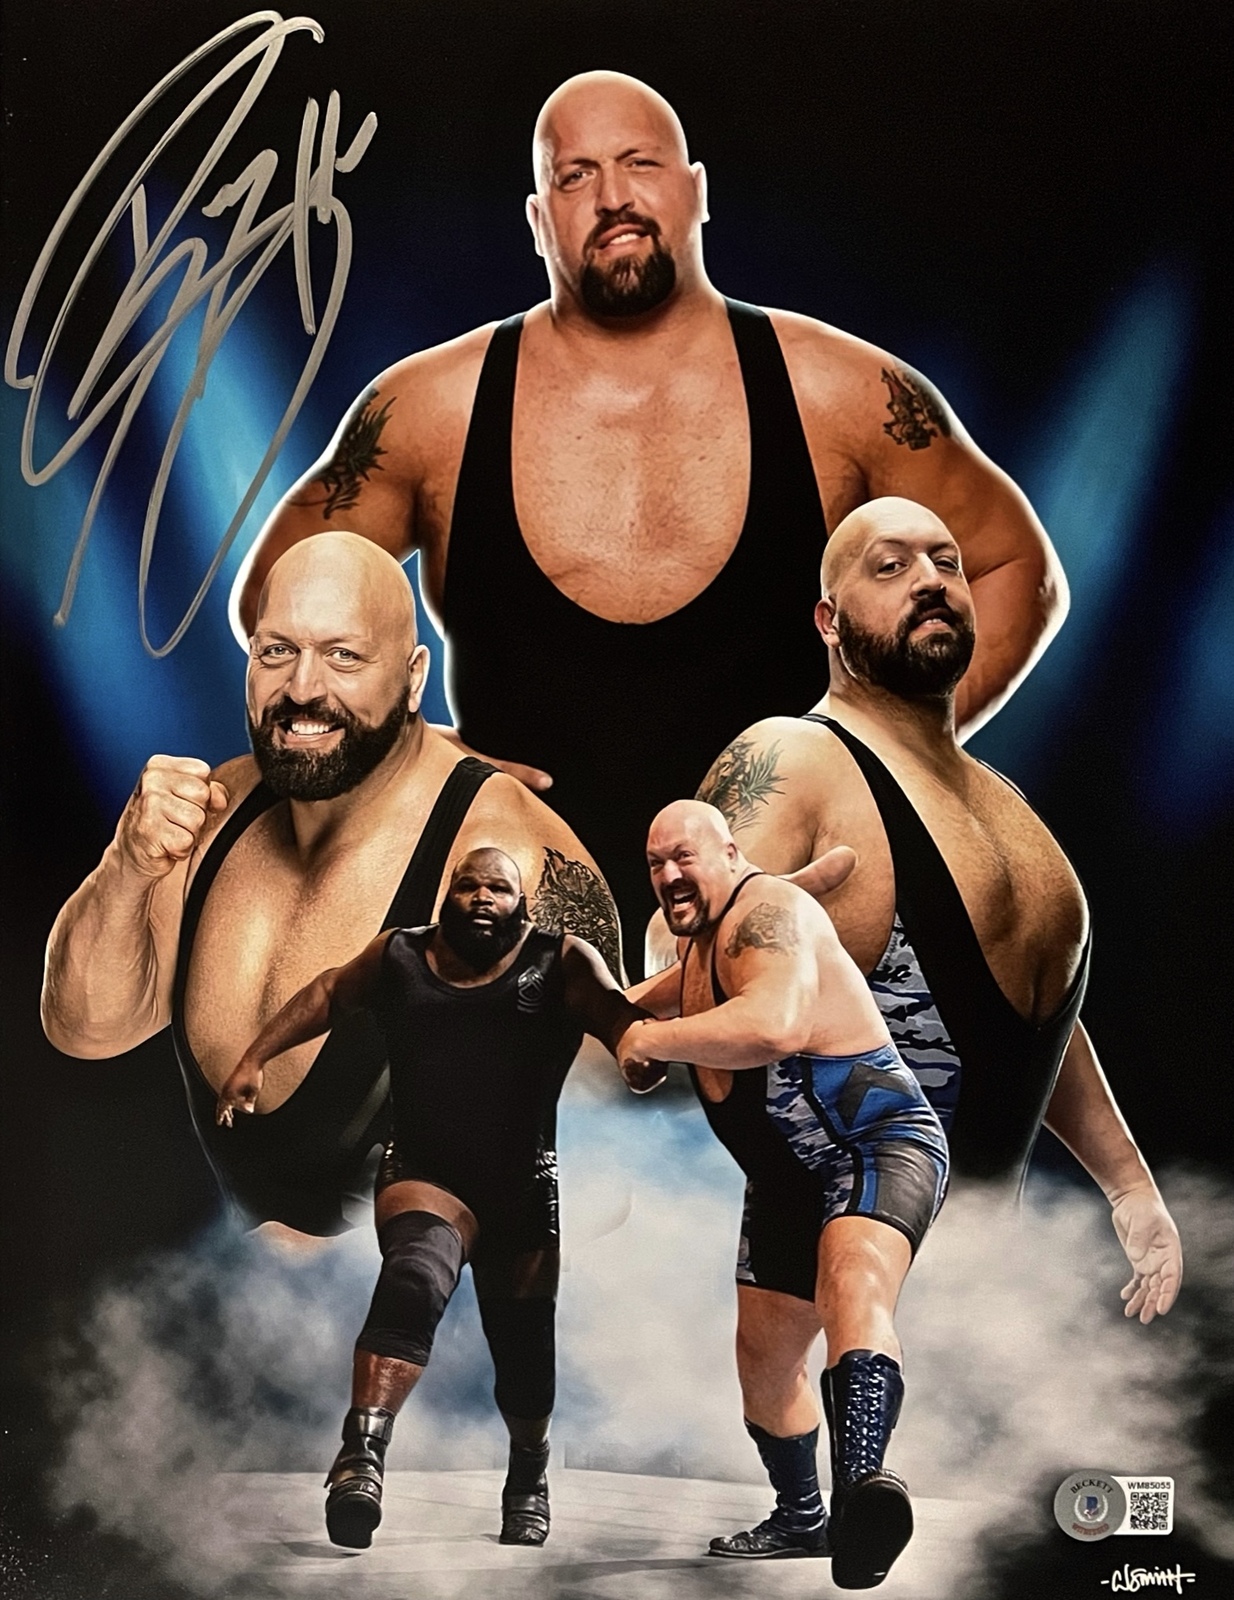 THE BIG SHOW PAUL WIGHT II Signed Autographed 11x14 PHOTO BECKETT CERTIFIED - $89.99